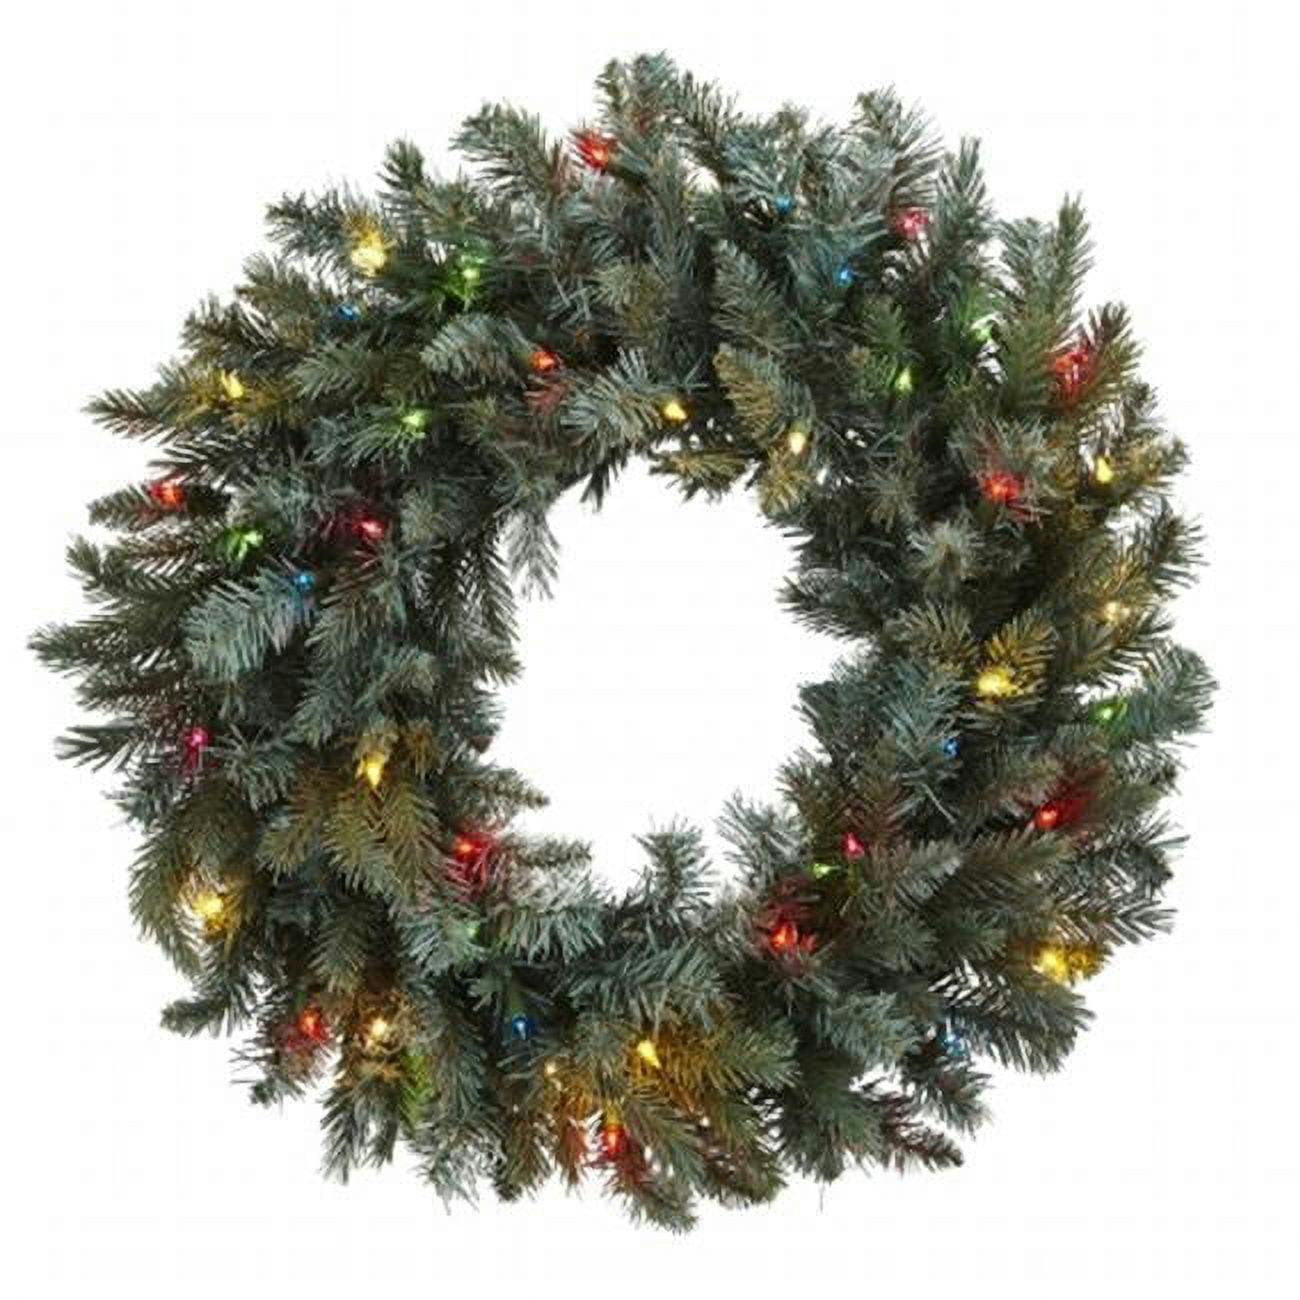 Festive Pine 24" Artificial Winter Wreath with Multicolor LED Lights